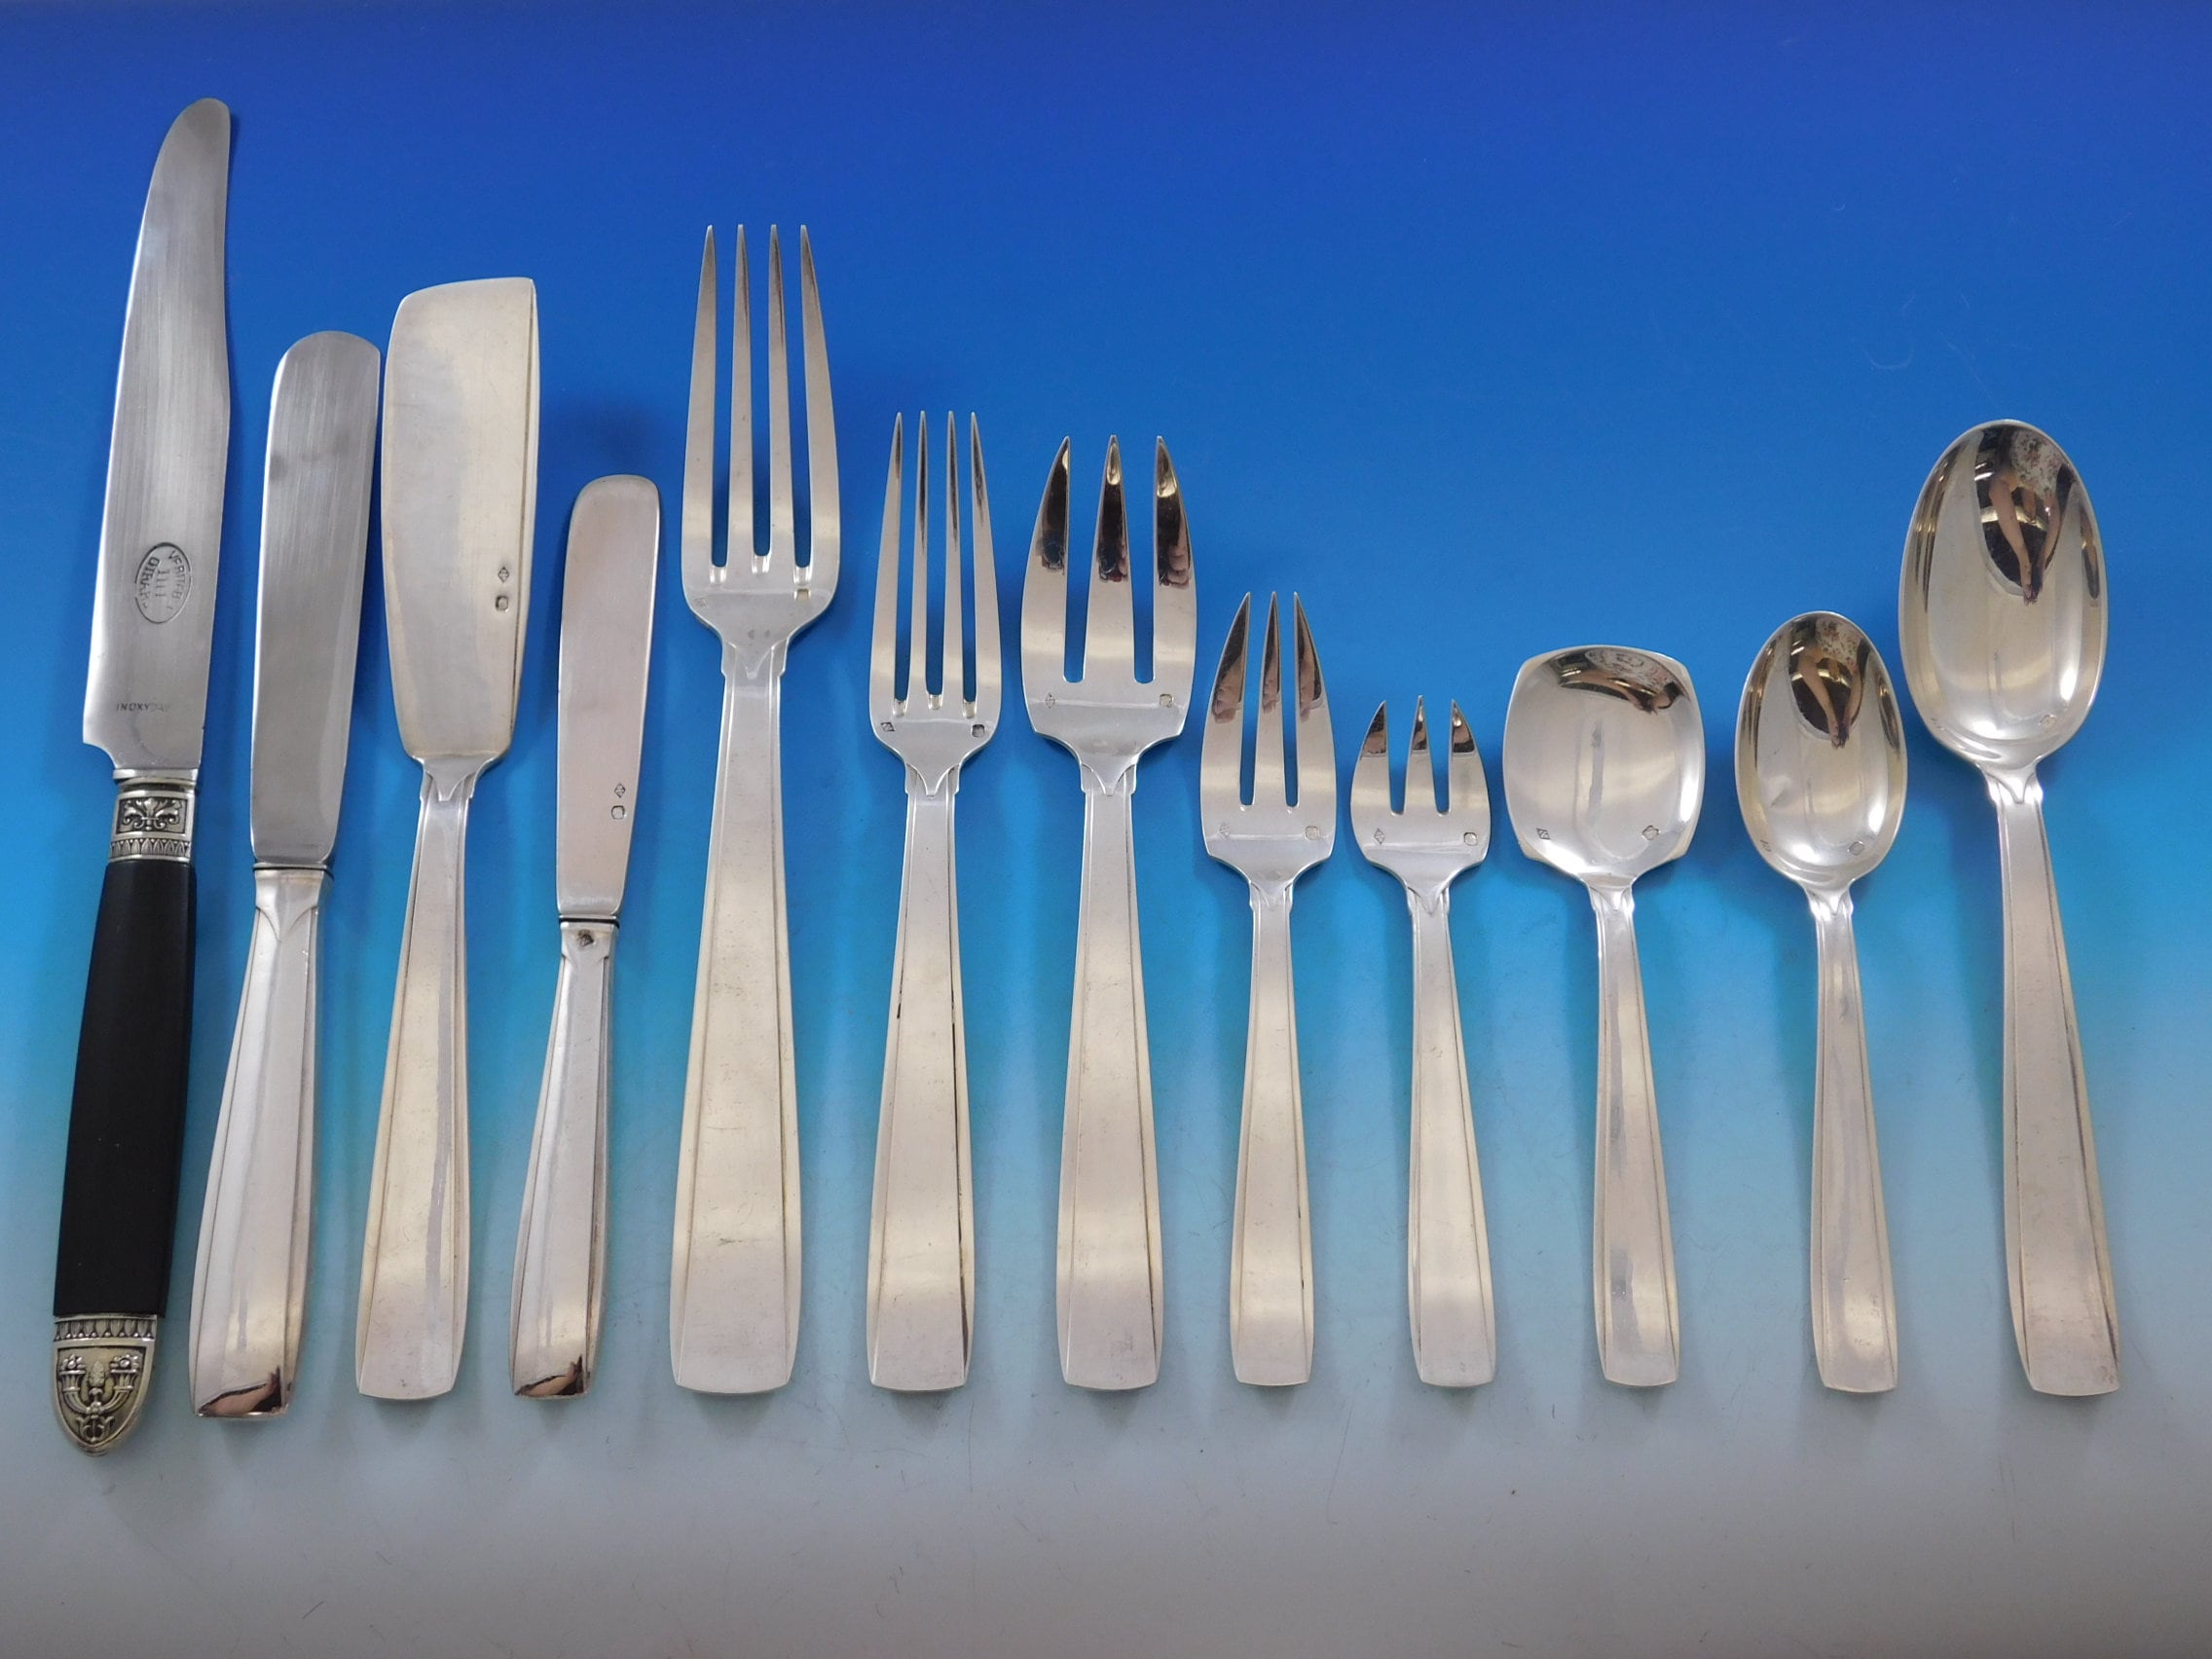 Looking to Buy Silver Flatware. Here Are 10 Key Things to Consider